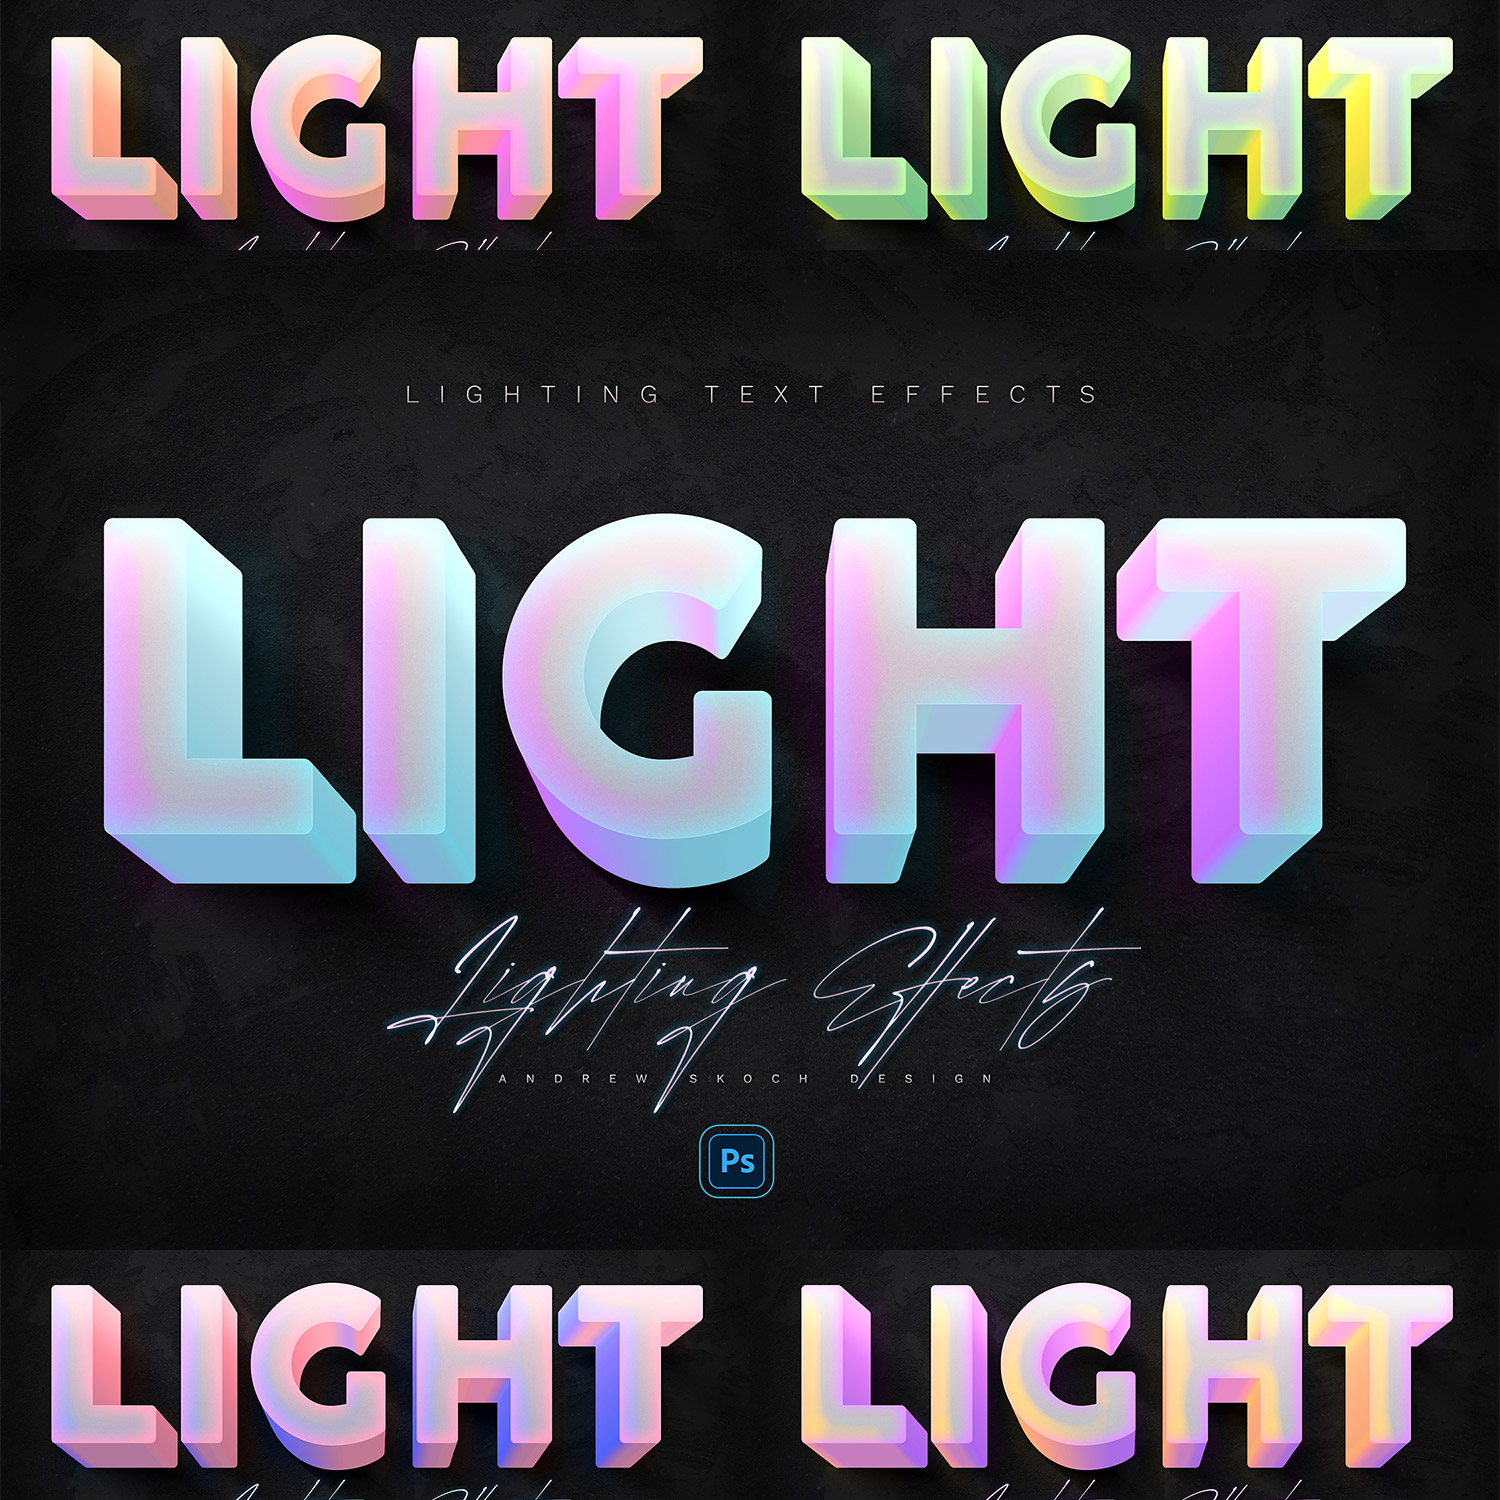 Double Light Text Effects cover image.